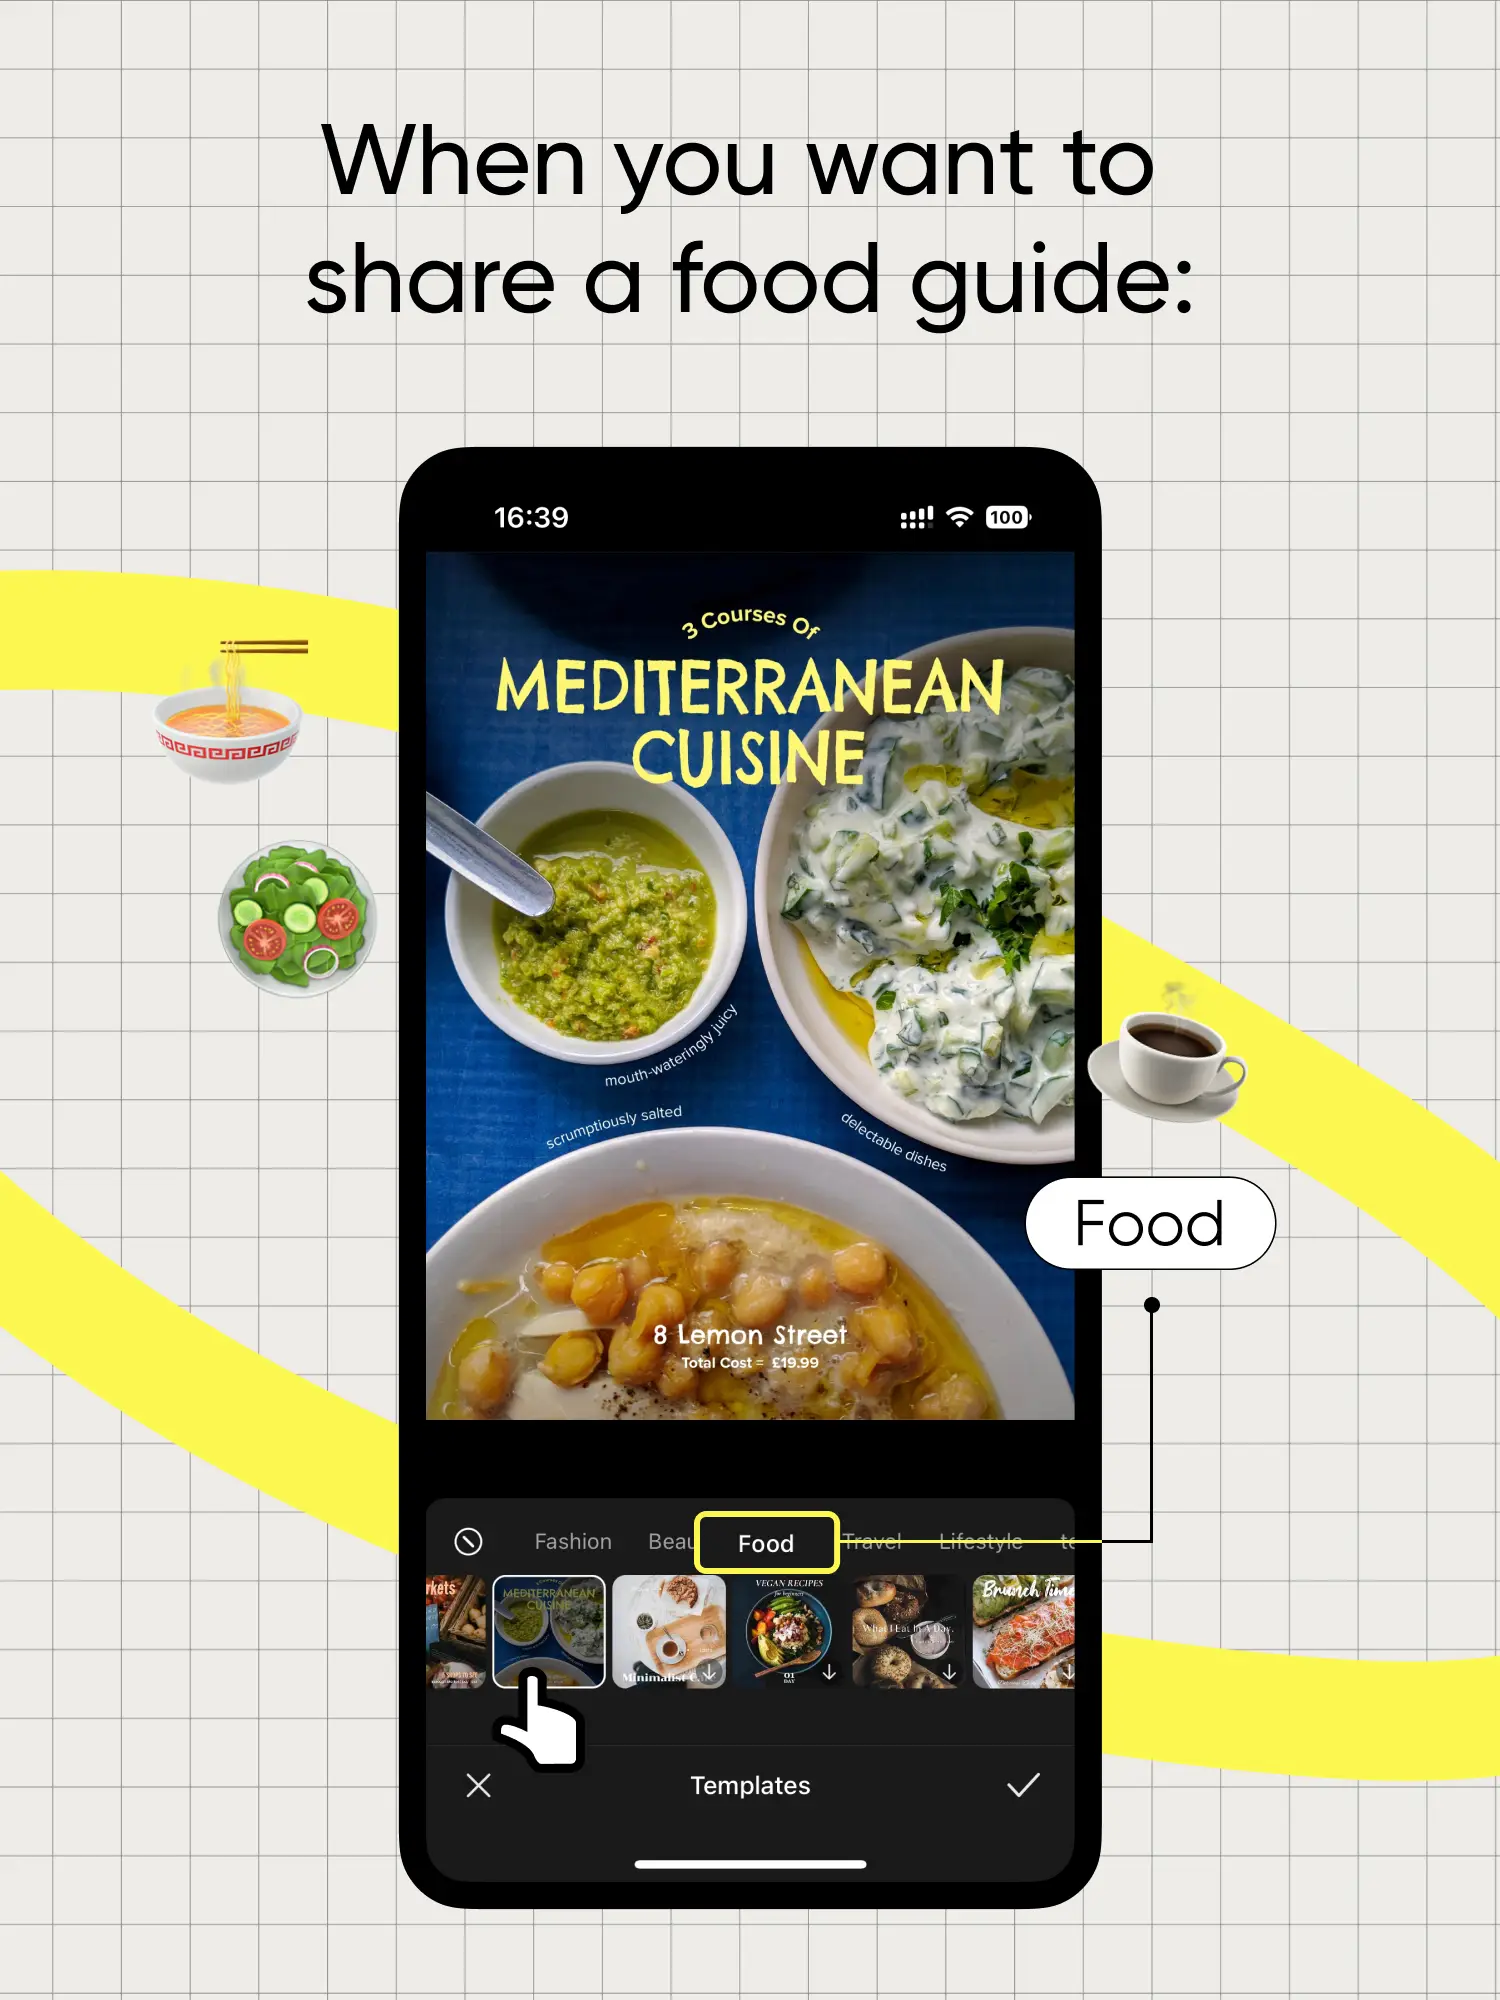  A phone screen displaying a list of food options.